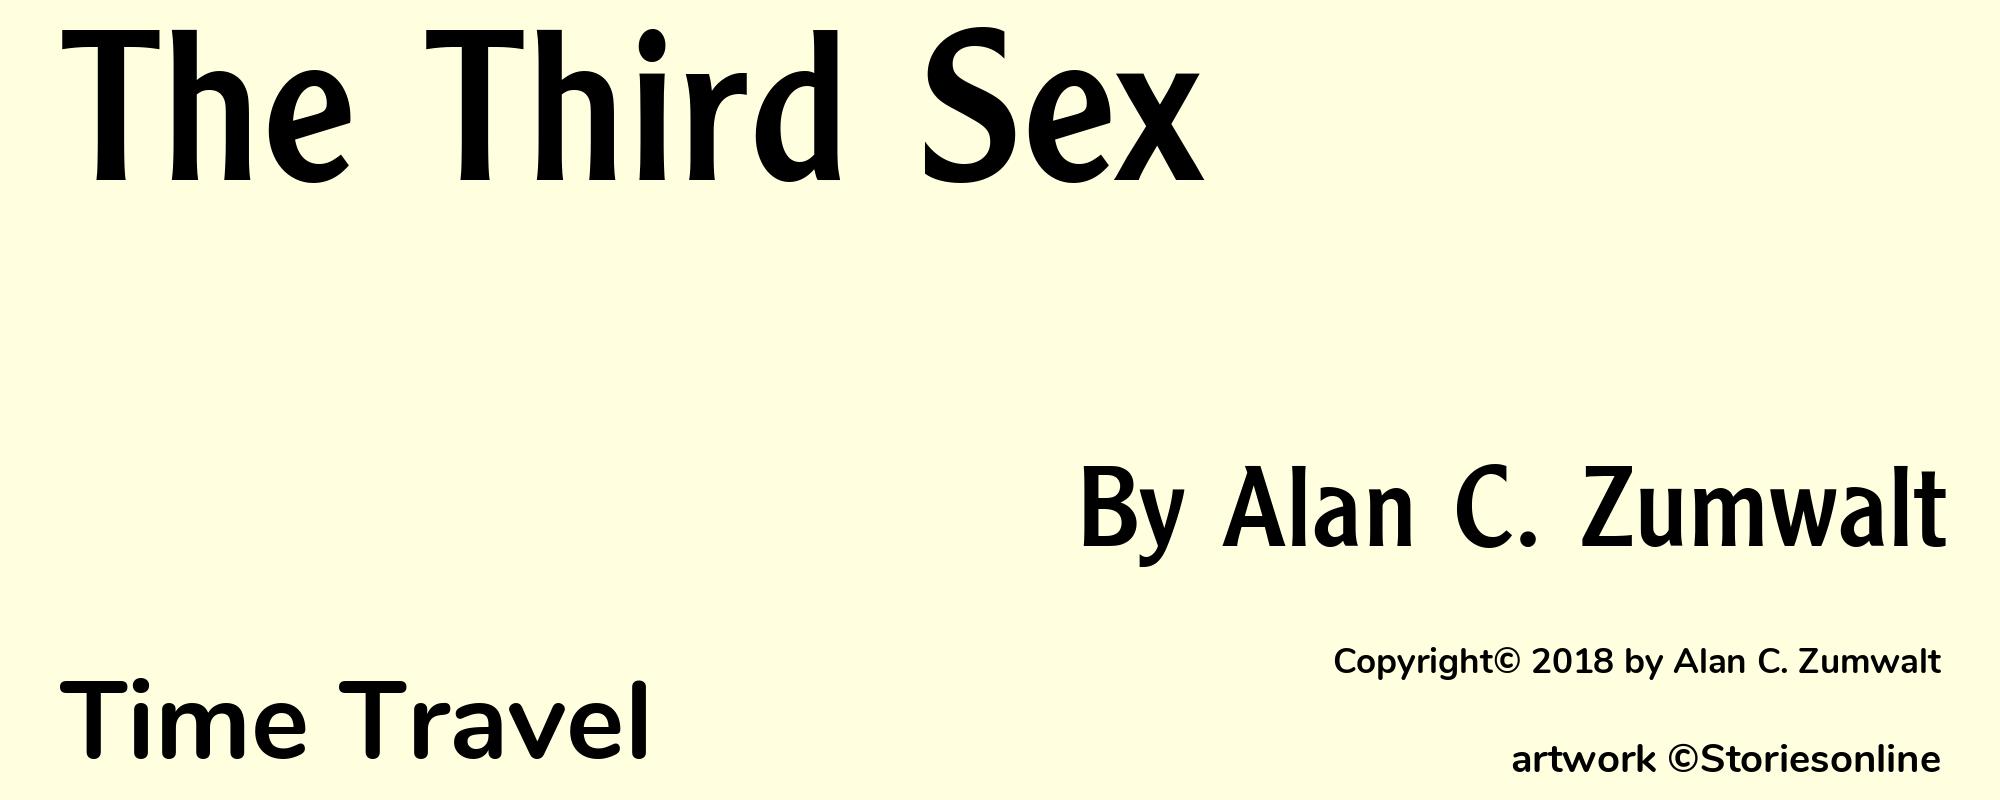 The Third Sex - Cover